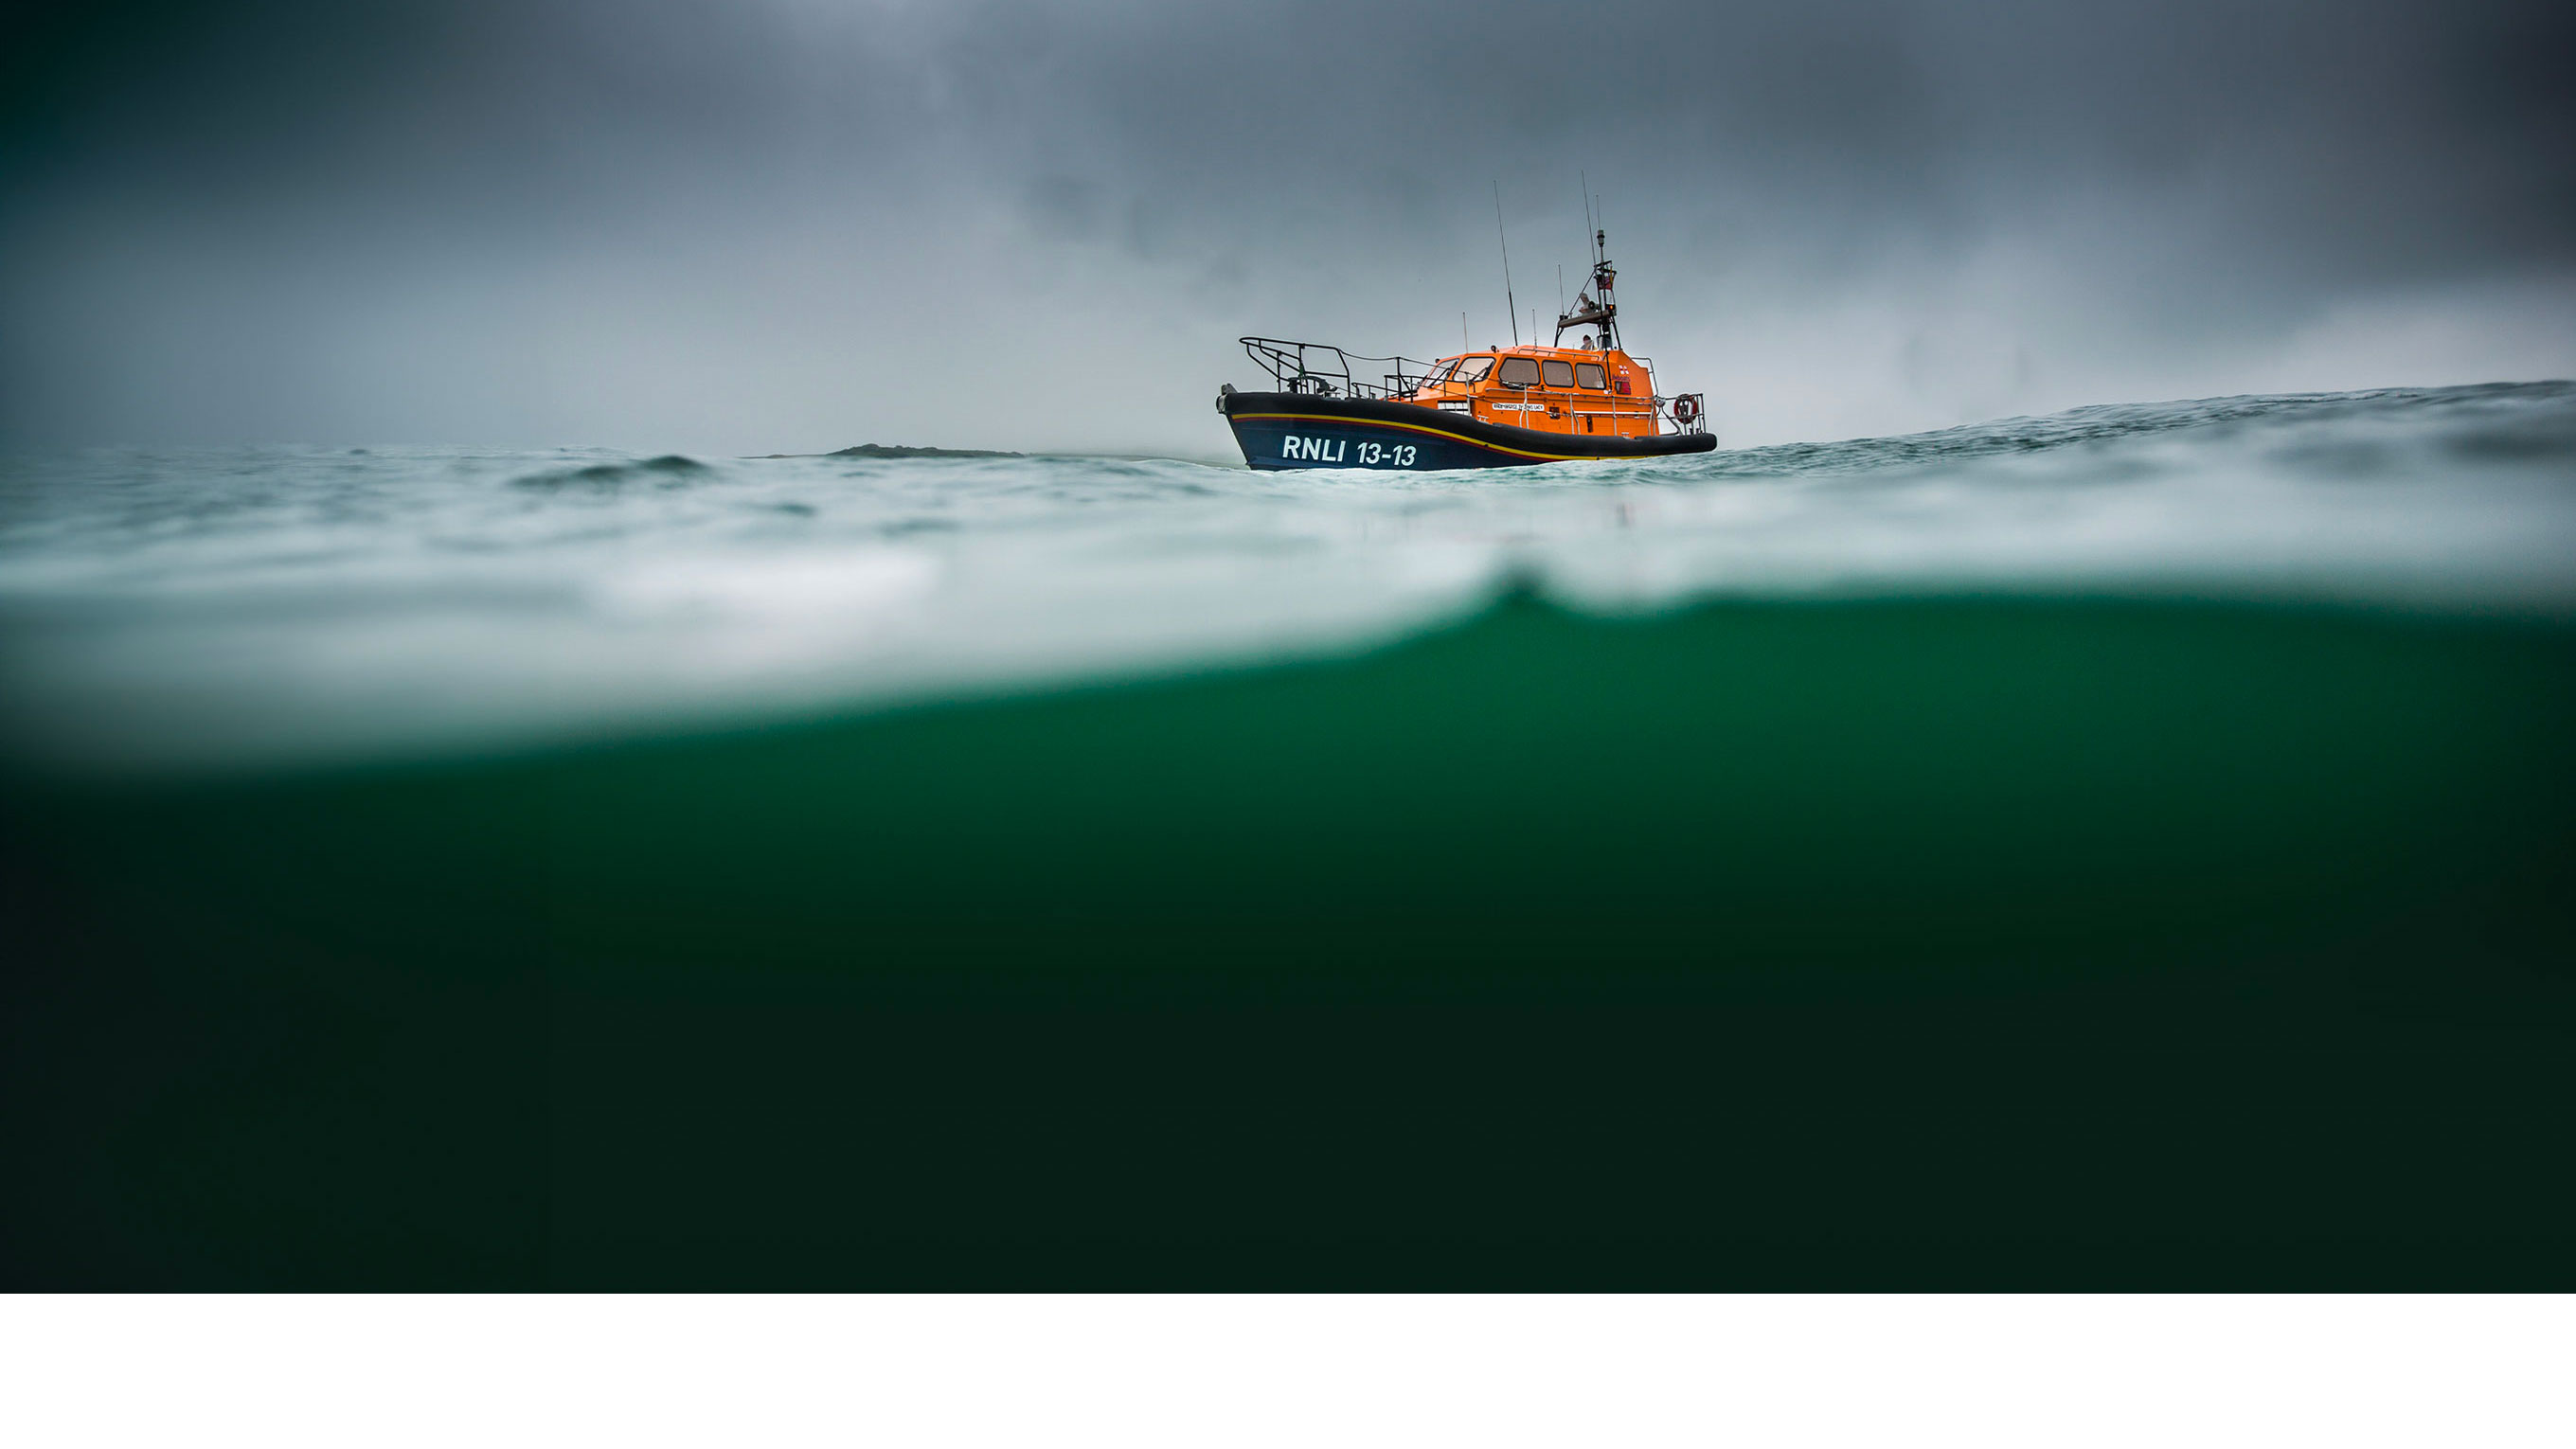 An all-weather Shannon class lifeboat is afloat on the horizon in choppy waves underneath a grey, angry sky.